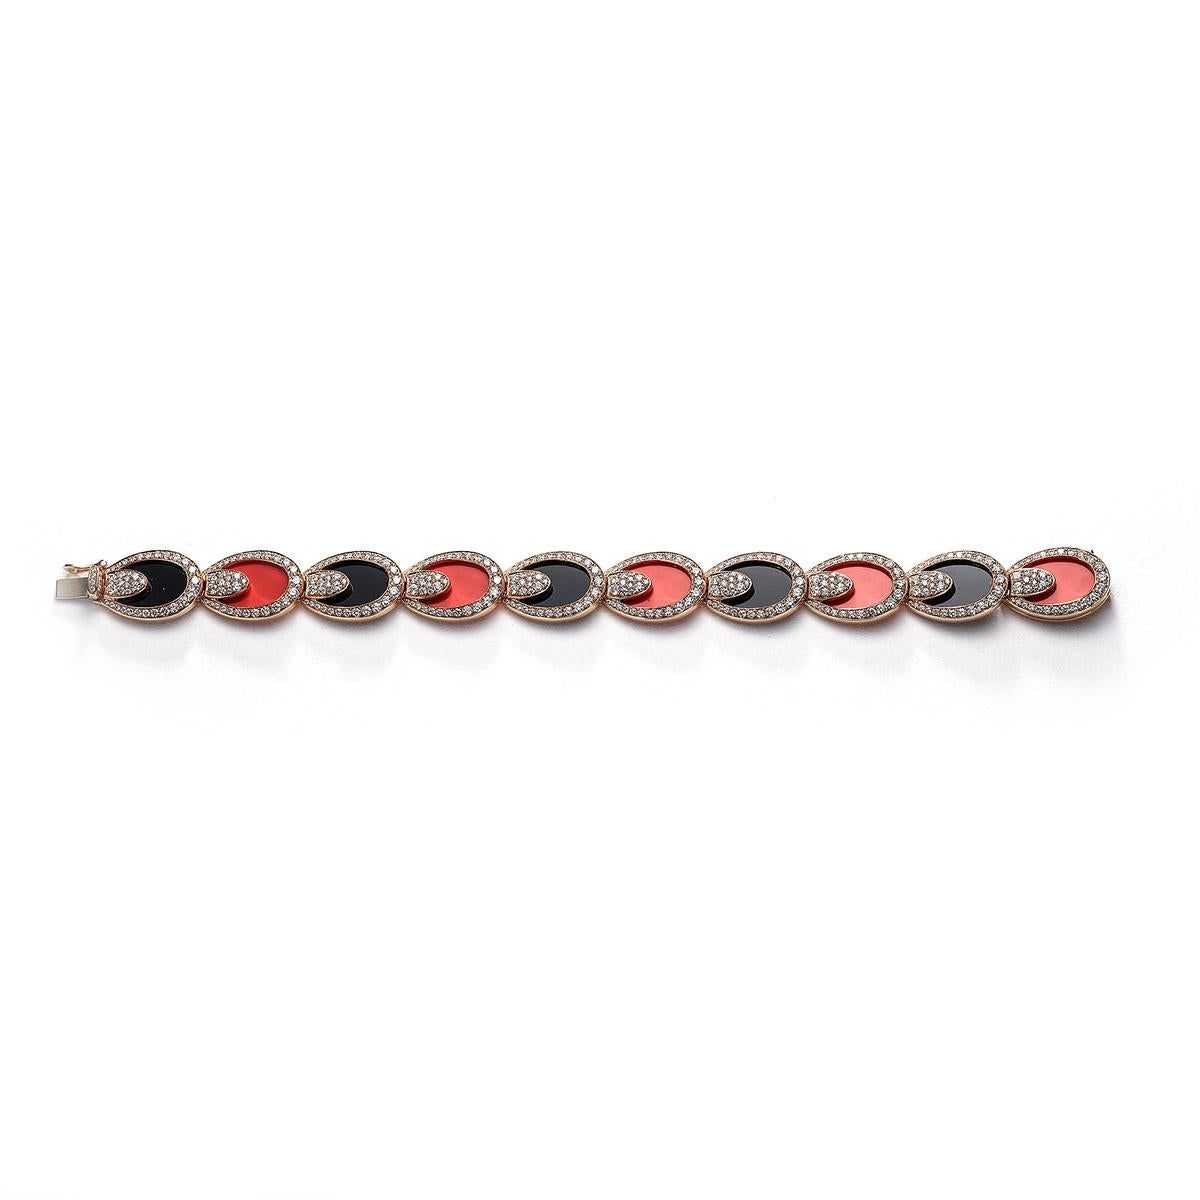 Bracelet in 18kt pink gold set with 374 diamonds 4.98 cts, 5 onyx 8.42 cts and 5 coral 5.99 cts   